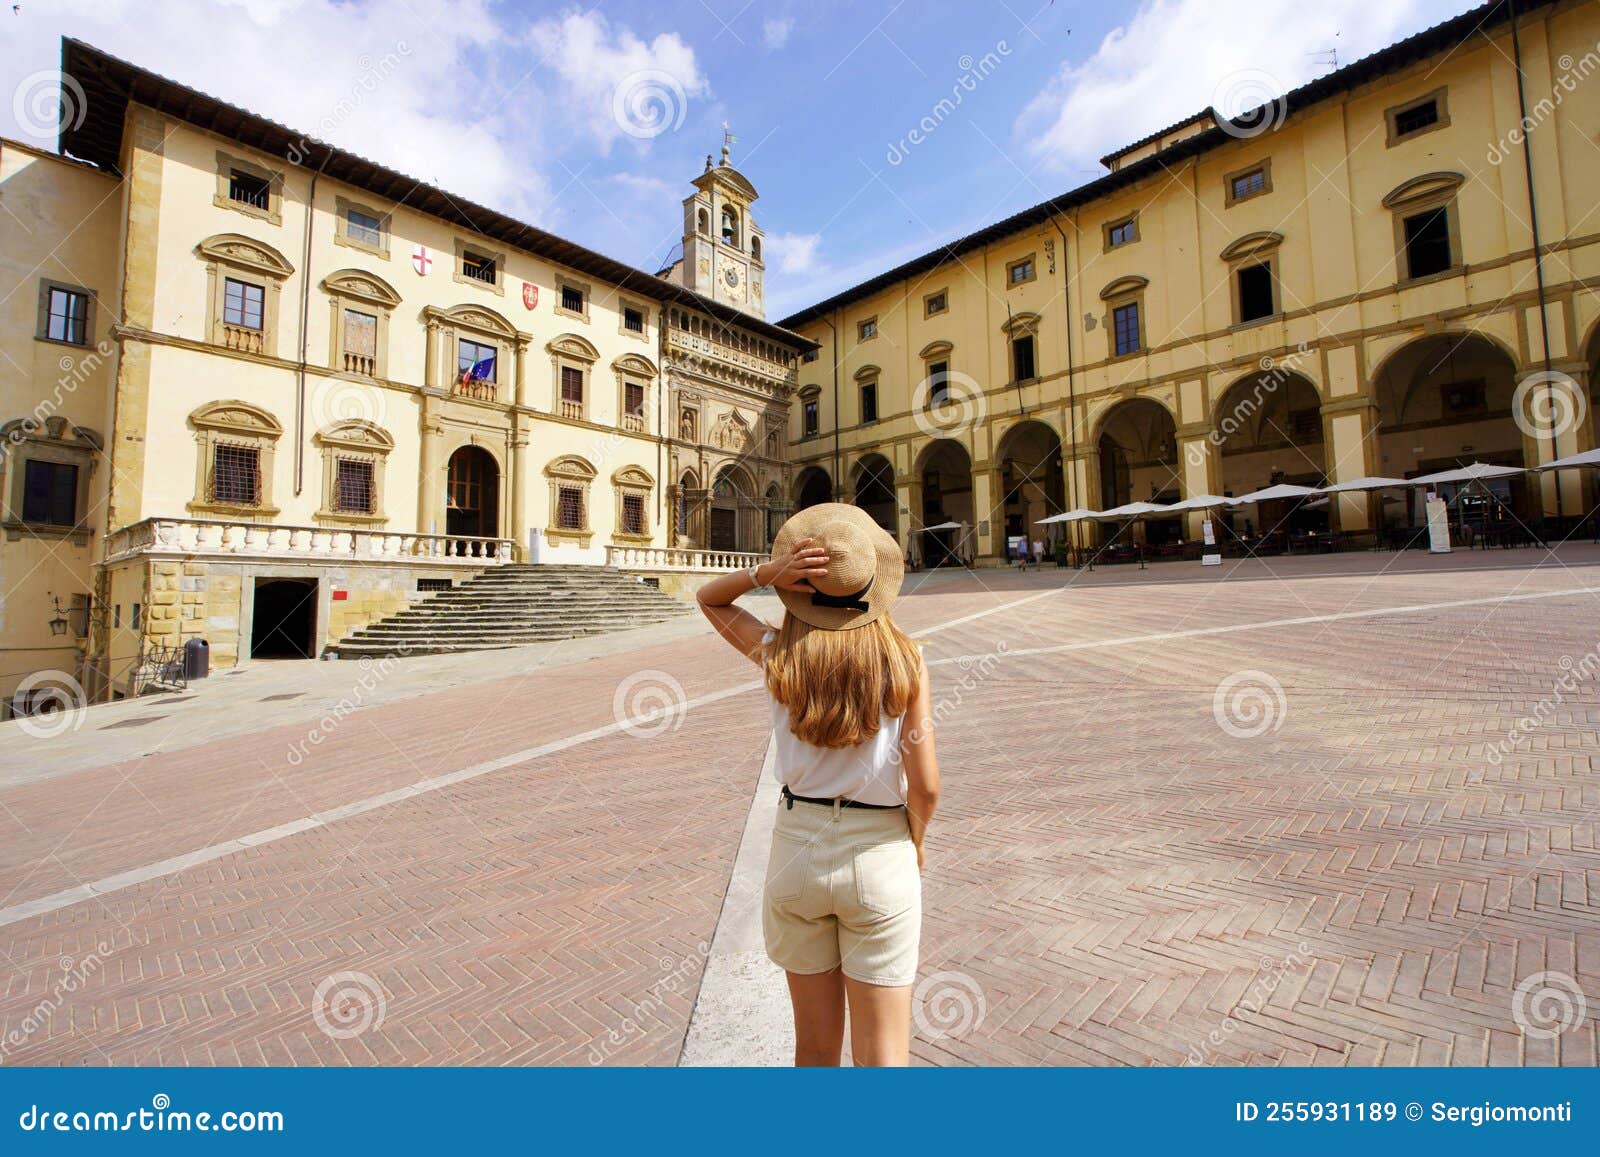 tourism in tuscany. back view of young traveler woman holding hat in piazza grande square in the old town of arezzo, tuscany,